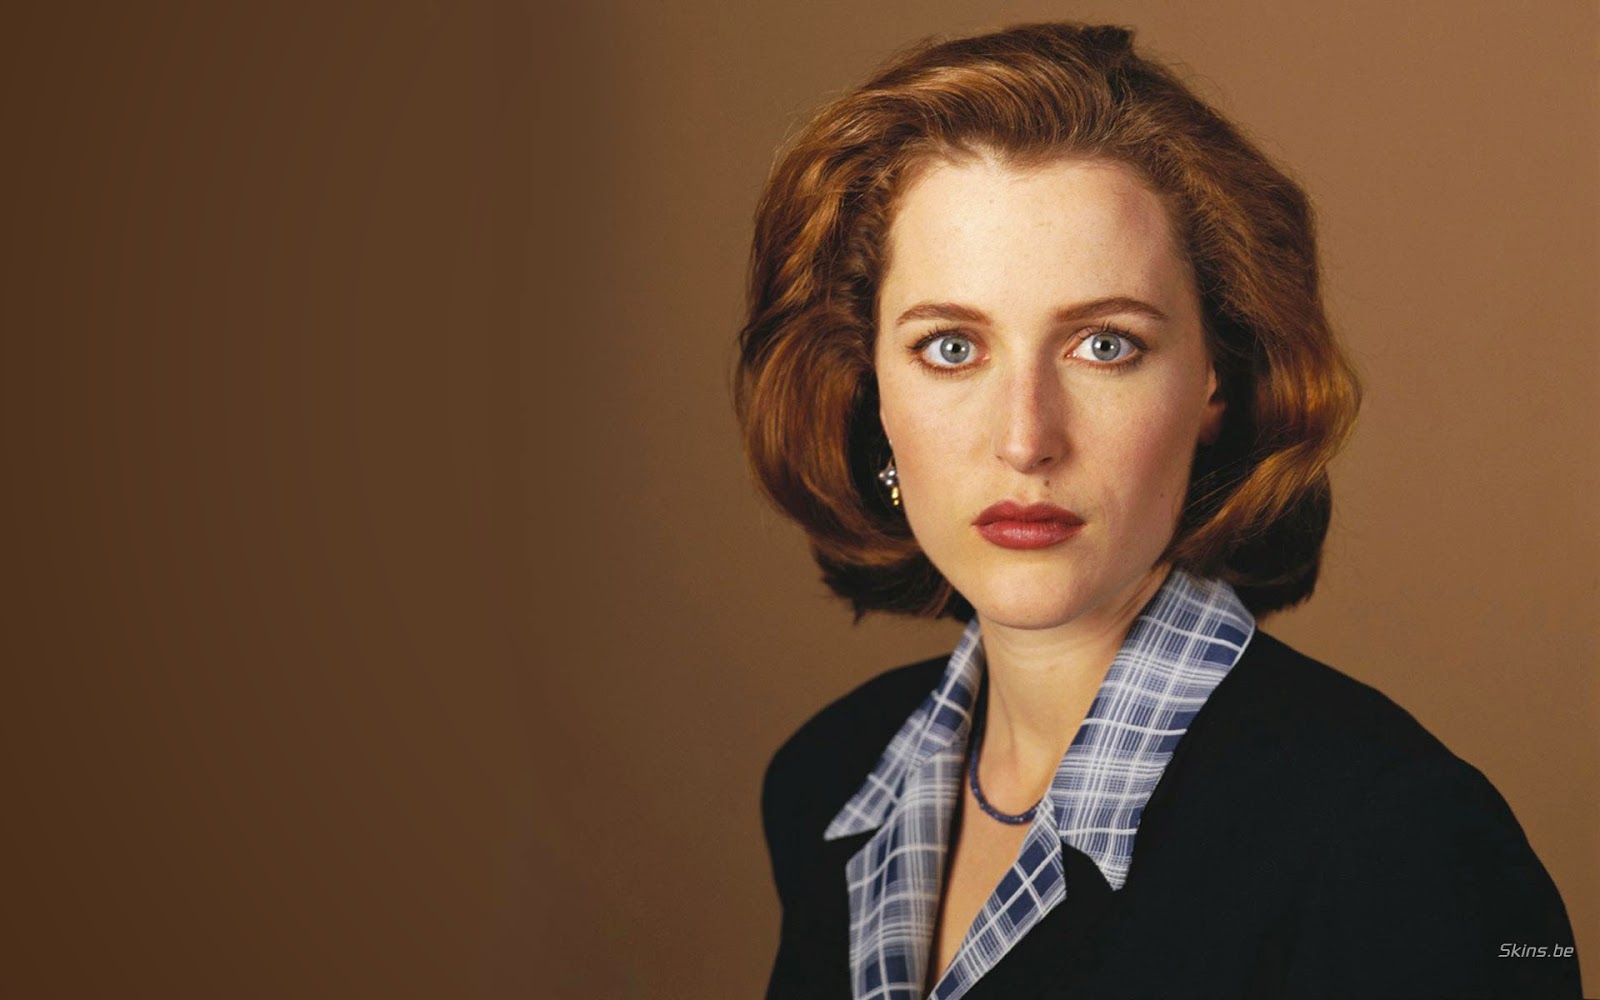 gillian anderson - Celeb Images 61600 x 1000